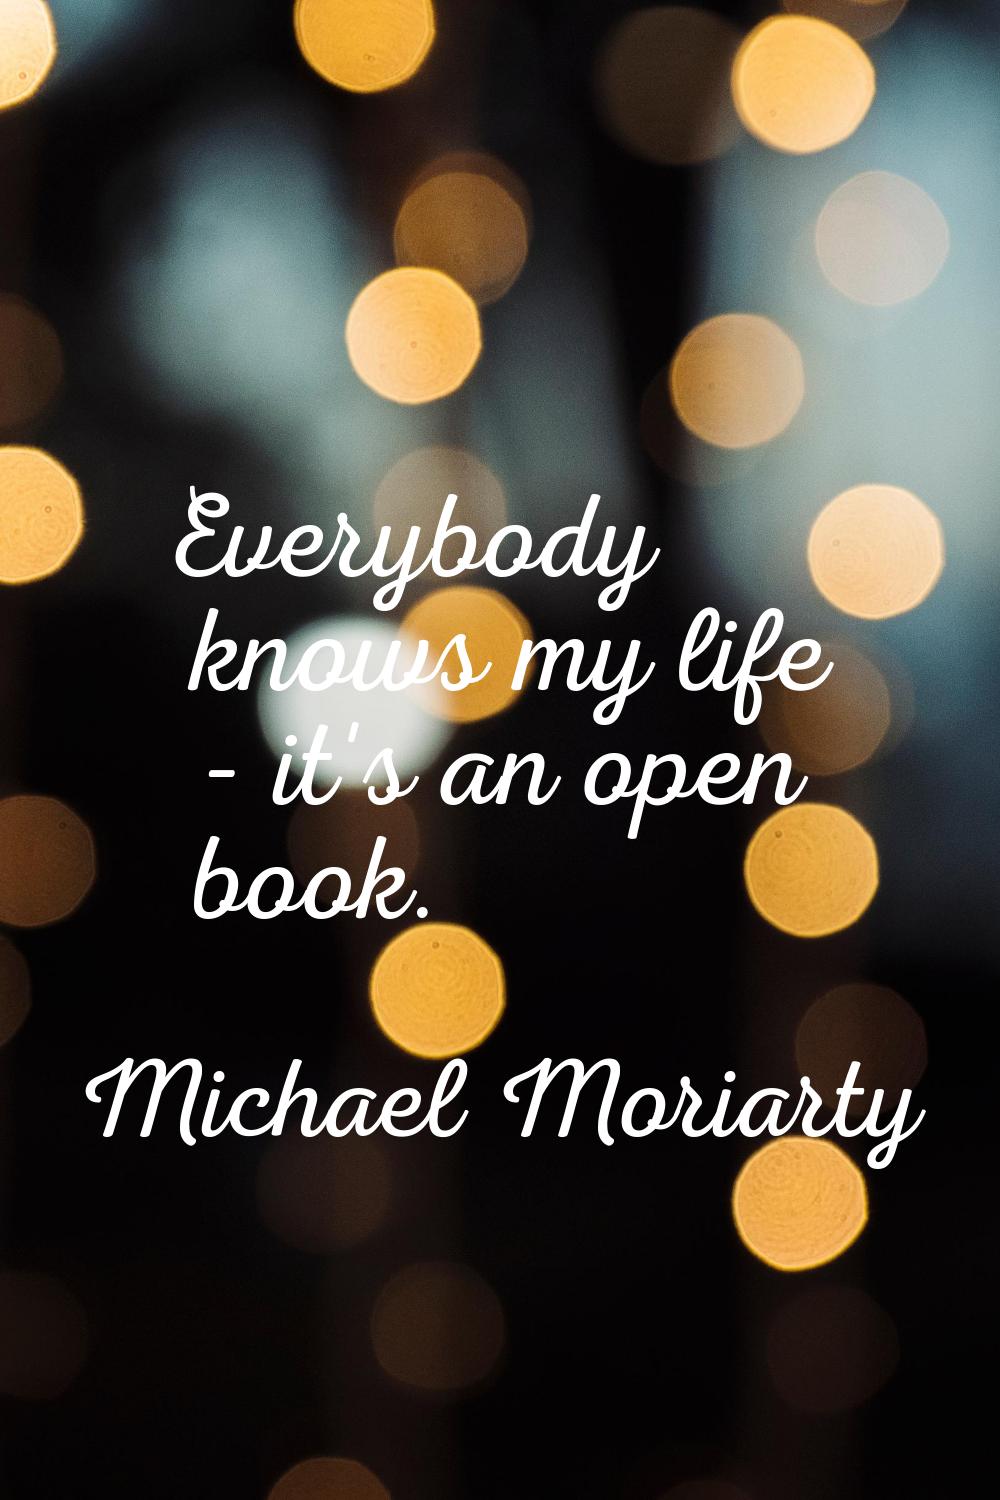 Everybody knows my life - it's an open book.